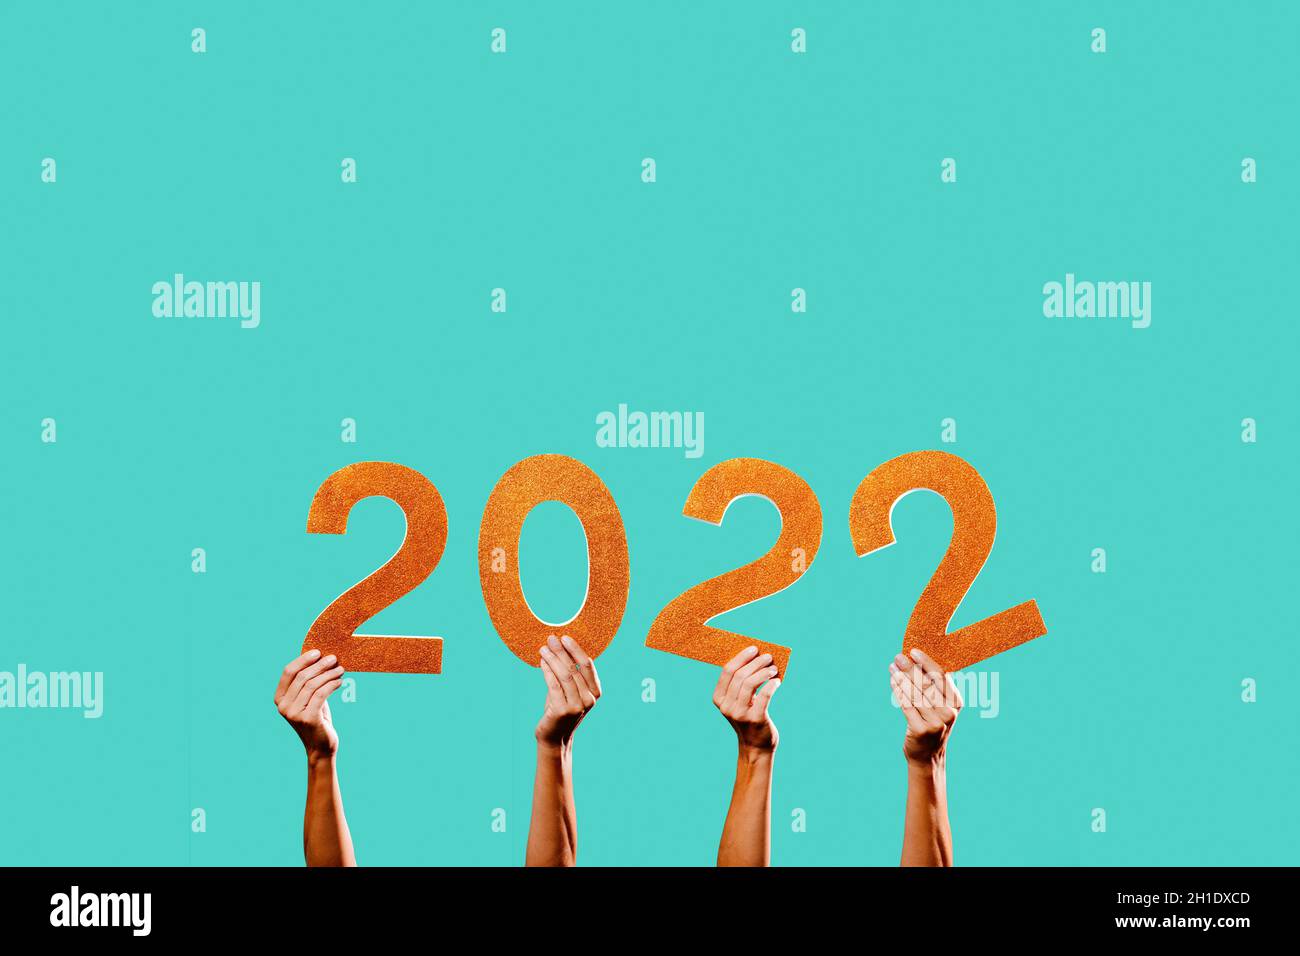 men hands holding some golden three-dimensional numbers forming the number 2022, as the new year, on a blue background with some blank space on top Stock Photo